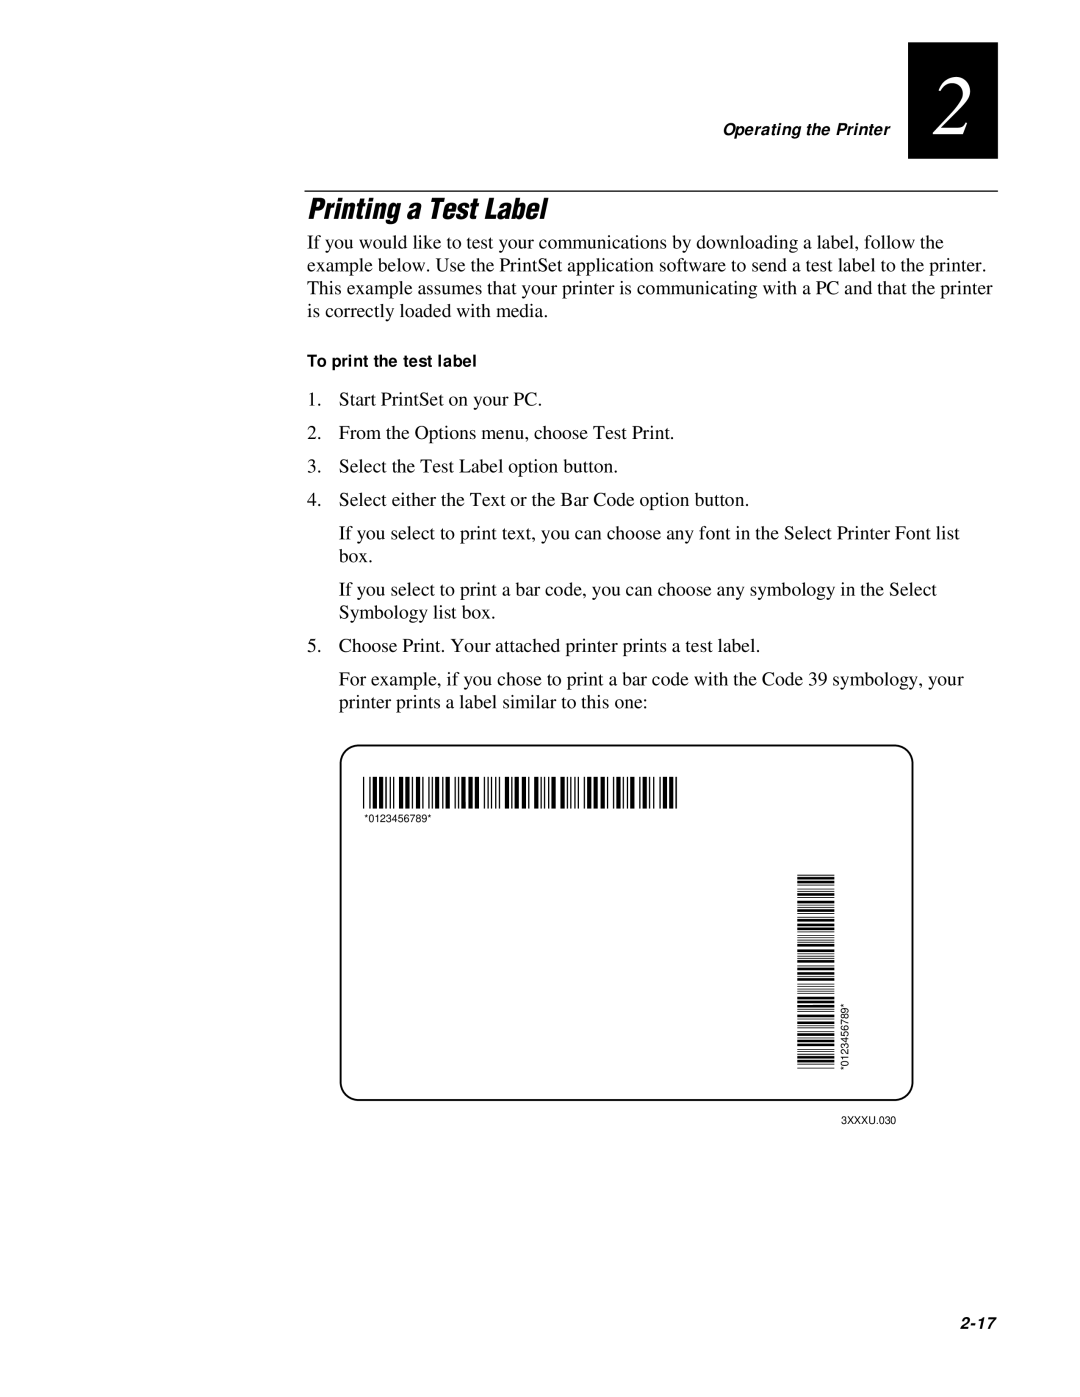 IBM EasyCoder 3400e user manual 0123456789, Printing a Test Label, To print the test label, 2-17 